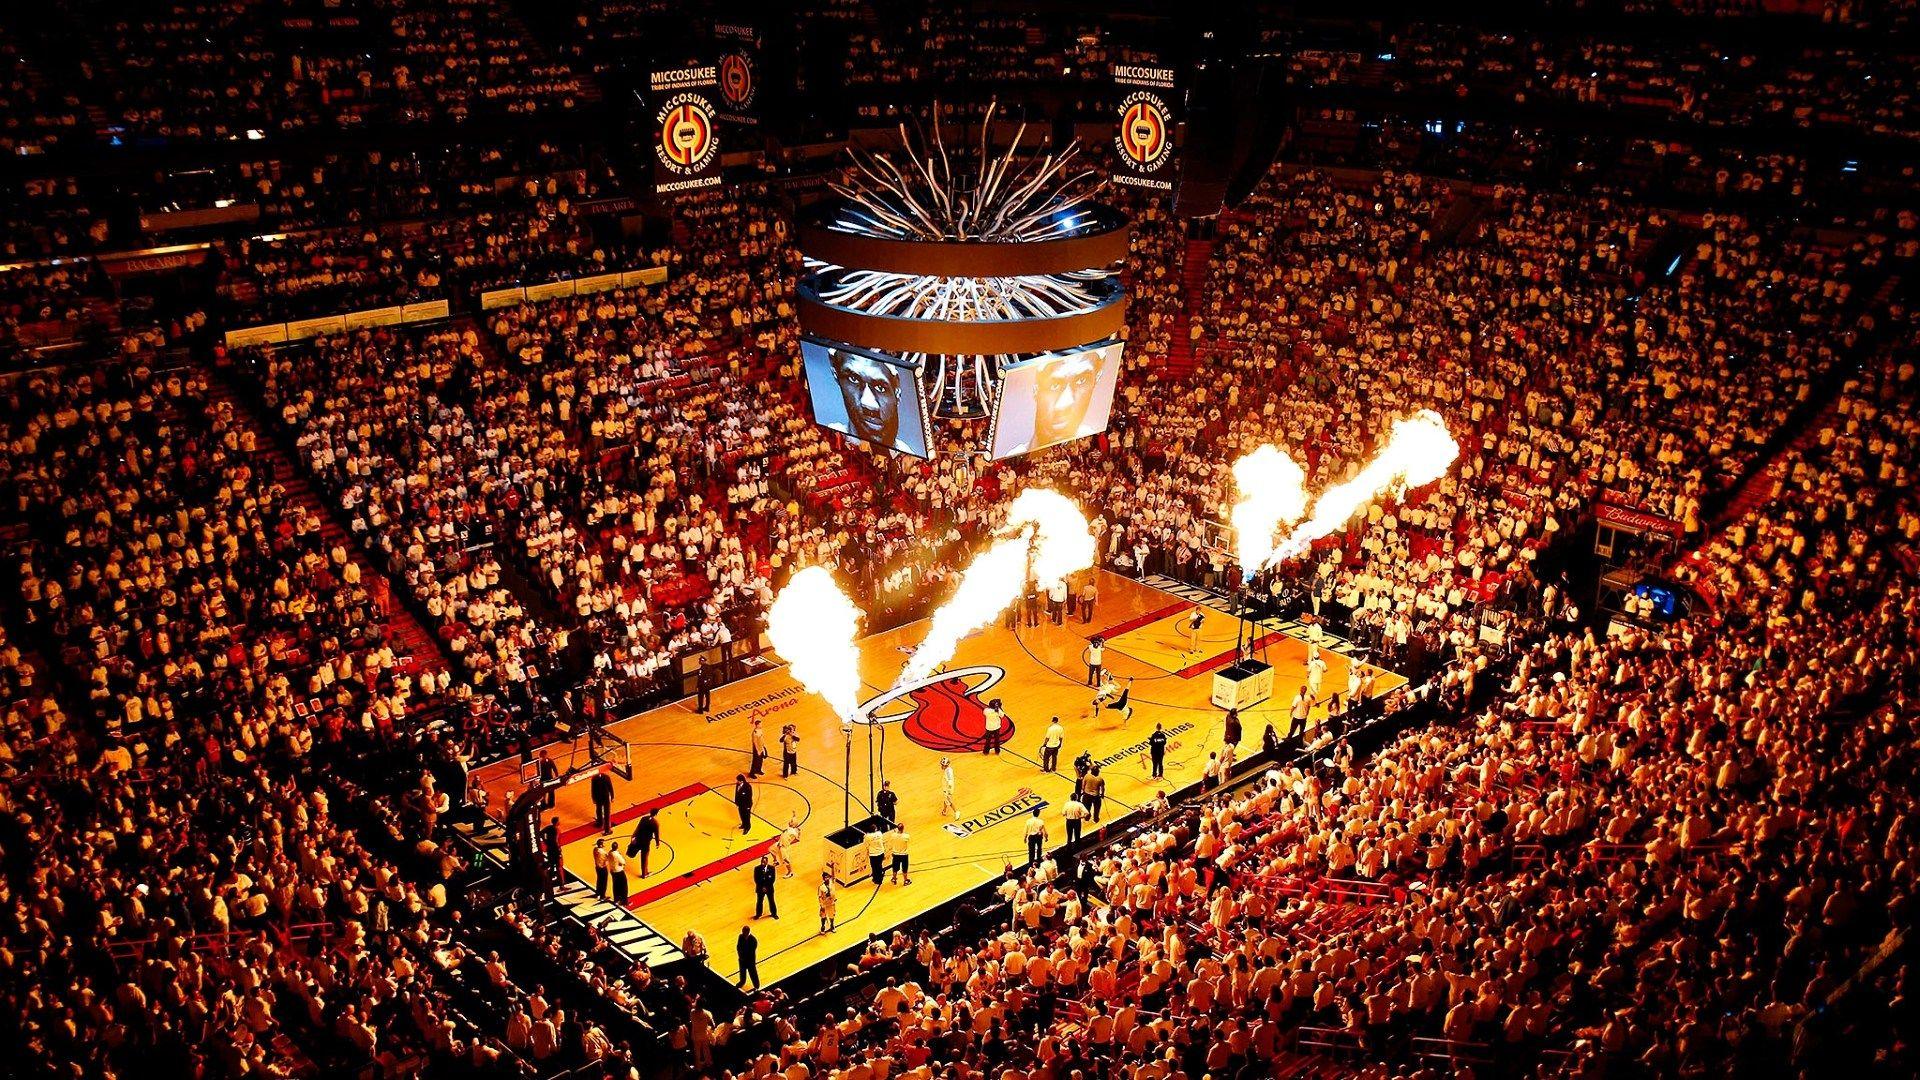 American Airlines Arena, Miami Heat HD Wallpaper & Background